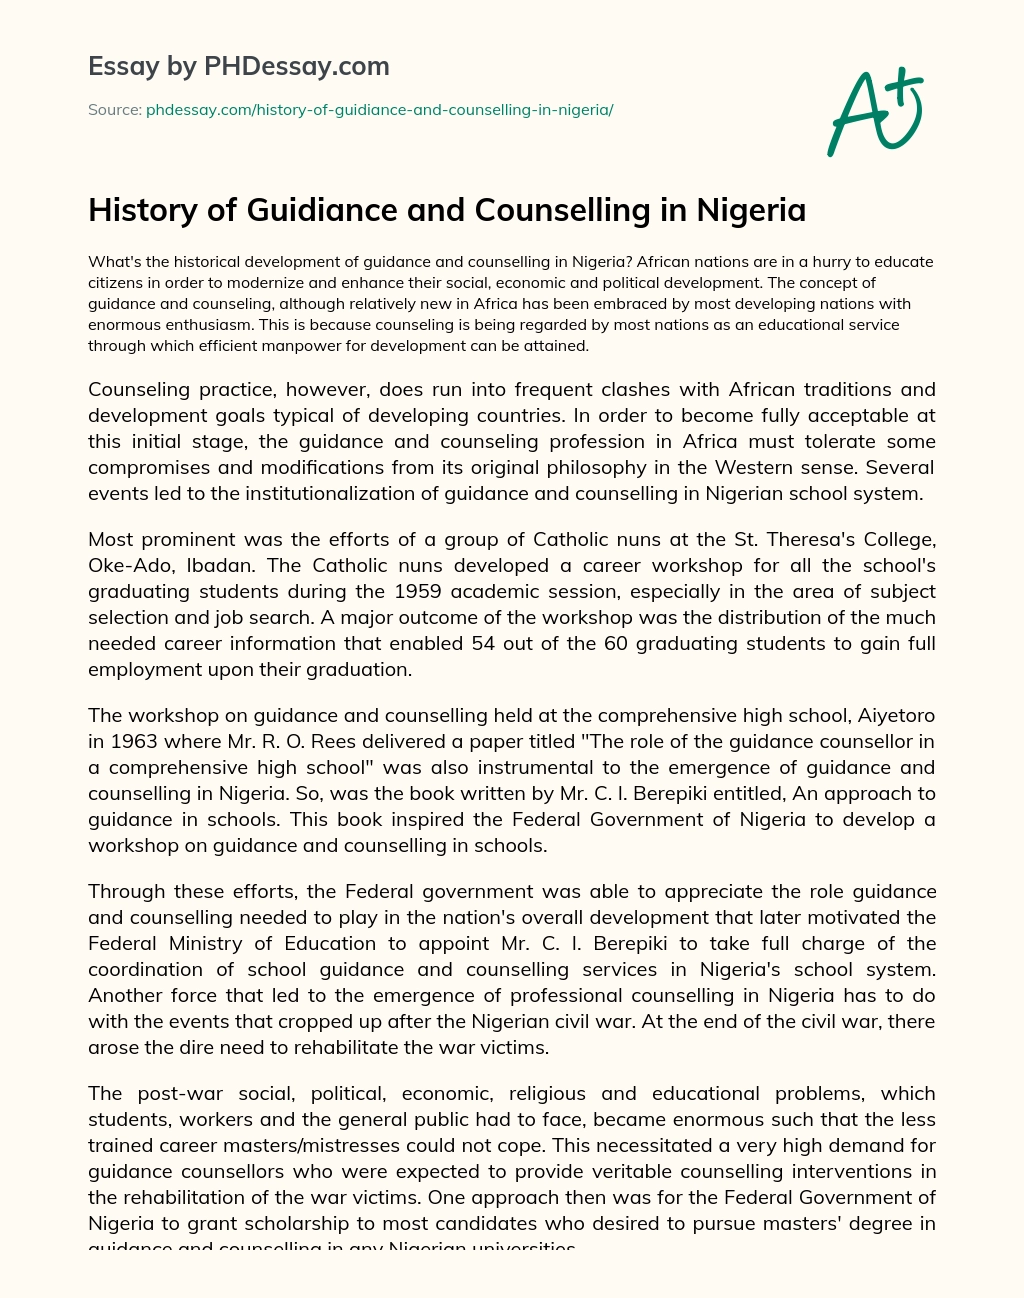 History of Guidiance and Counselling in Nigeria essay